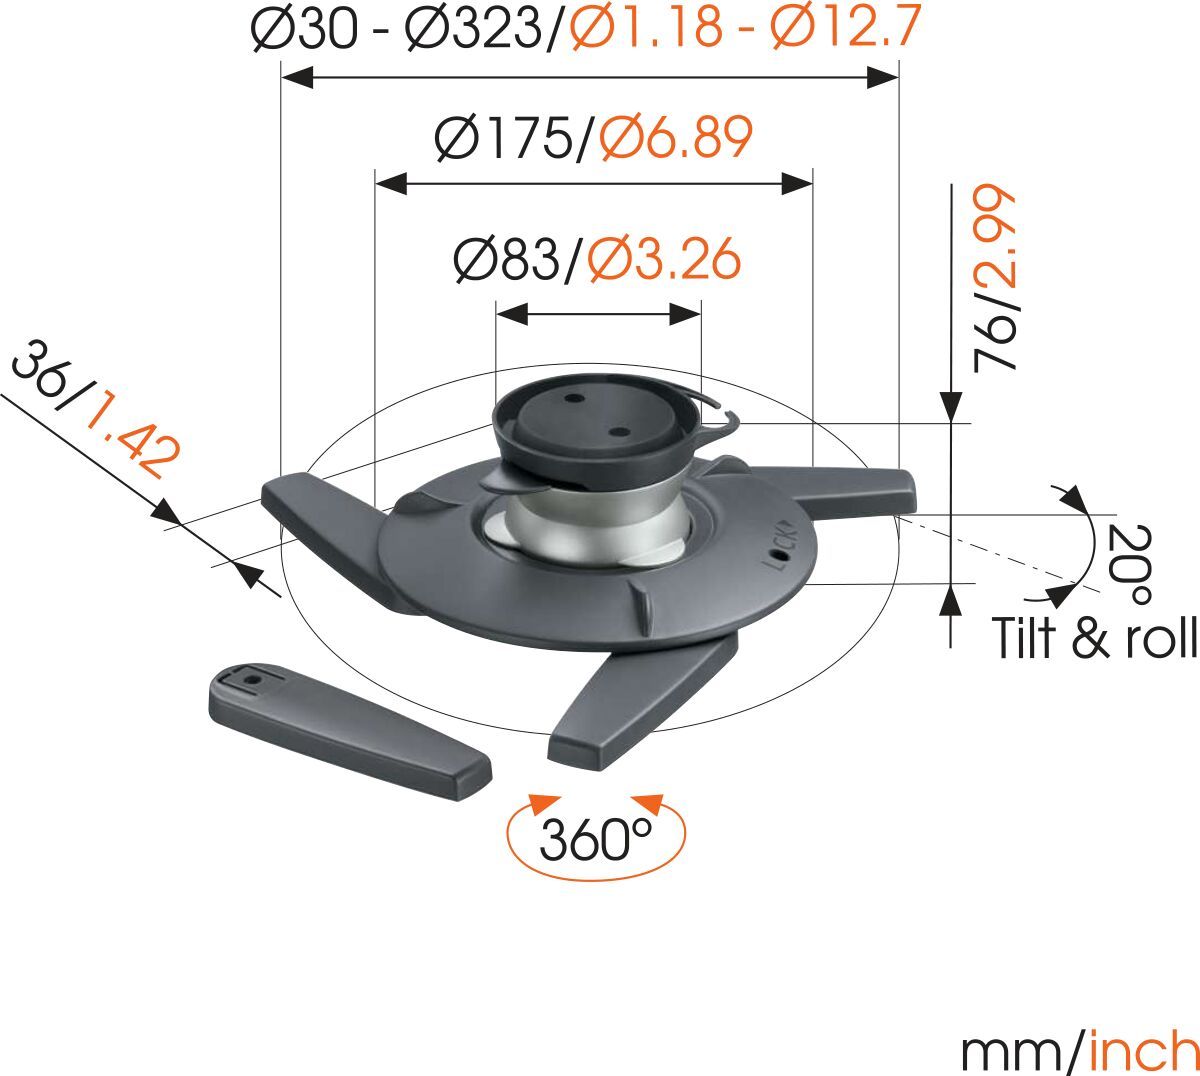 Vogel's EPC 6545 Projector Ceiling Mount - Max. weight load: 10 kg - Dimensions